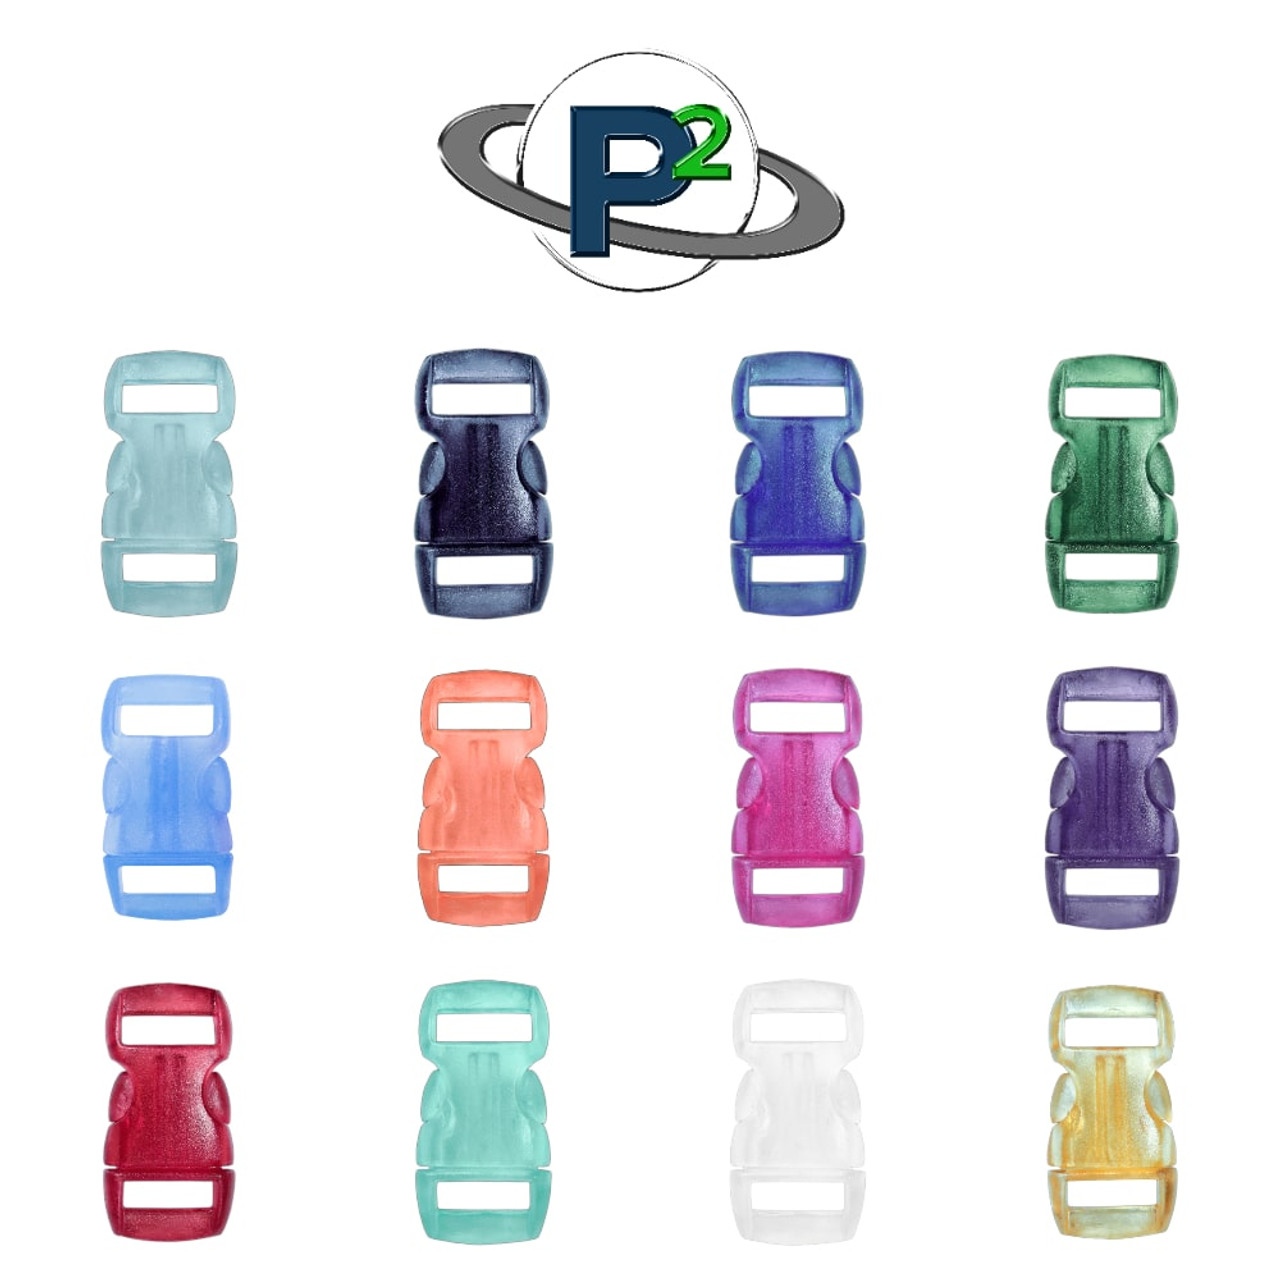 3/8 inch Side Release Contoured Buckles - Solid Colors